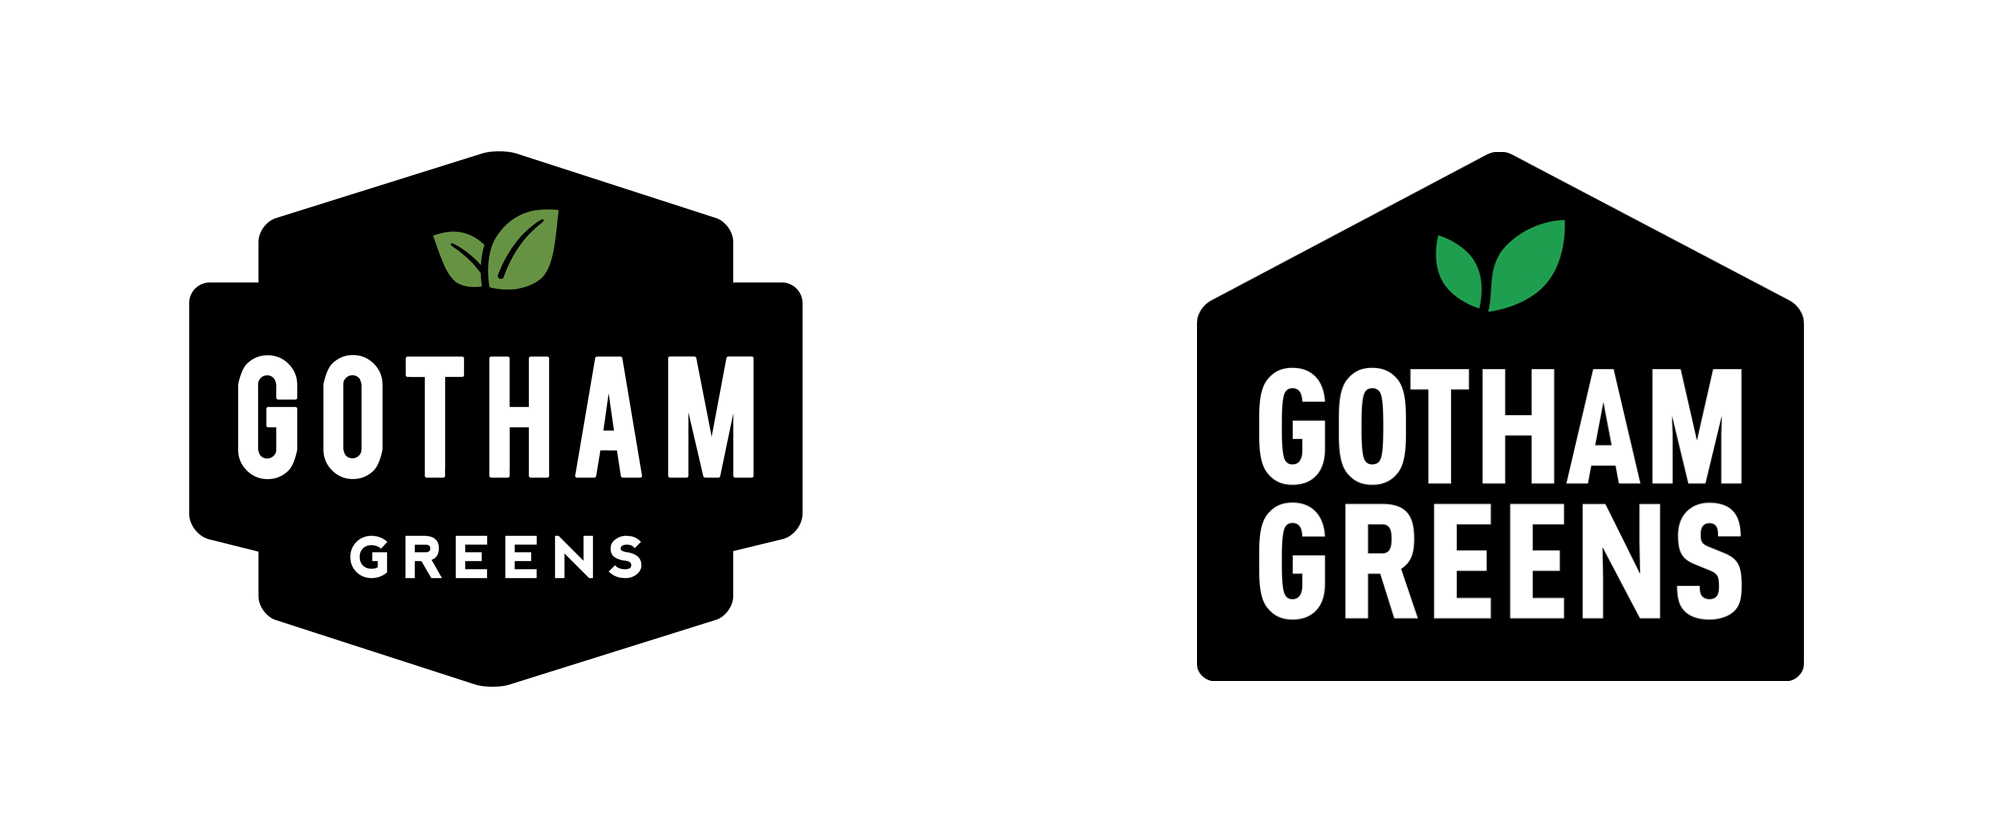 New Logo and Packaging for Gotham Greens